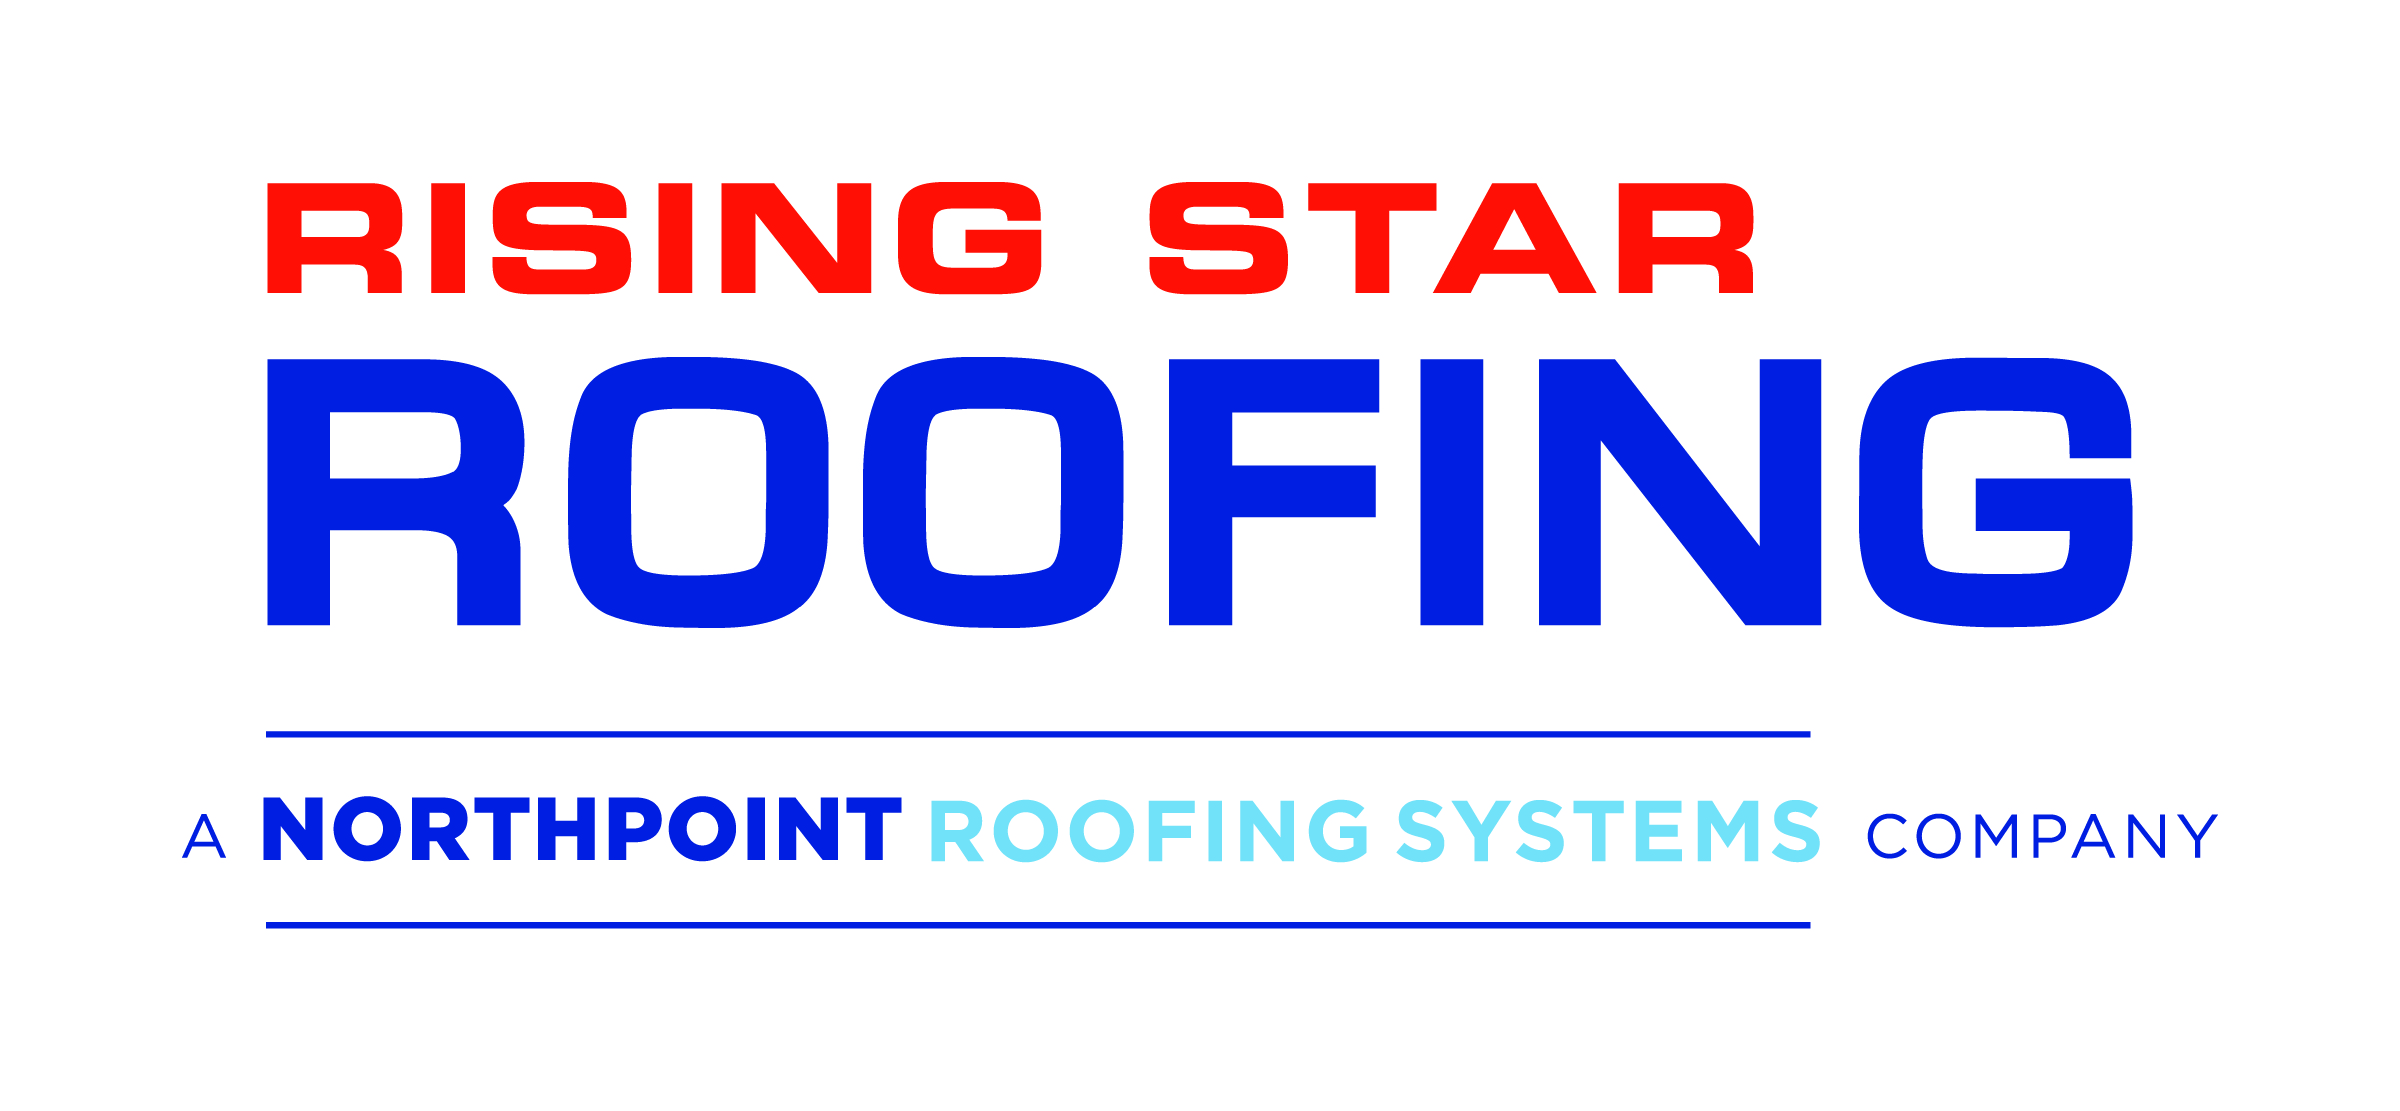 Rising Star Roofing 